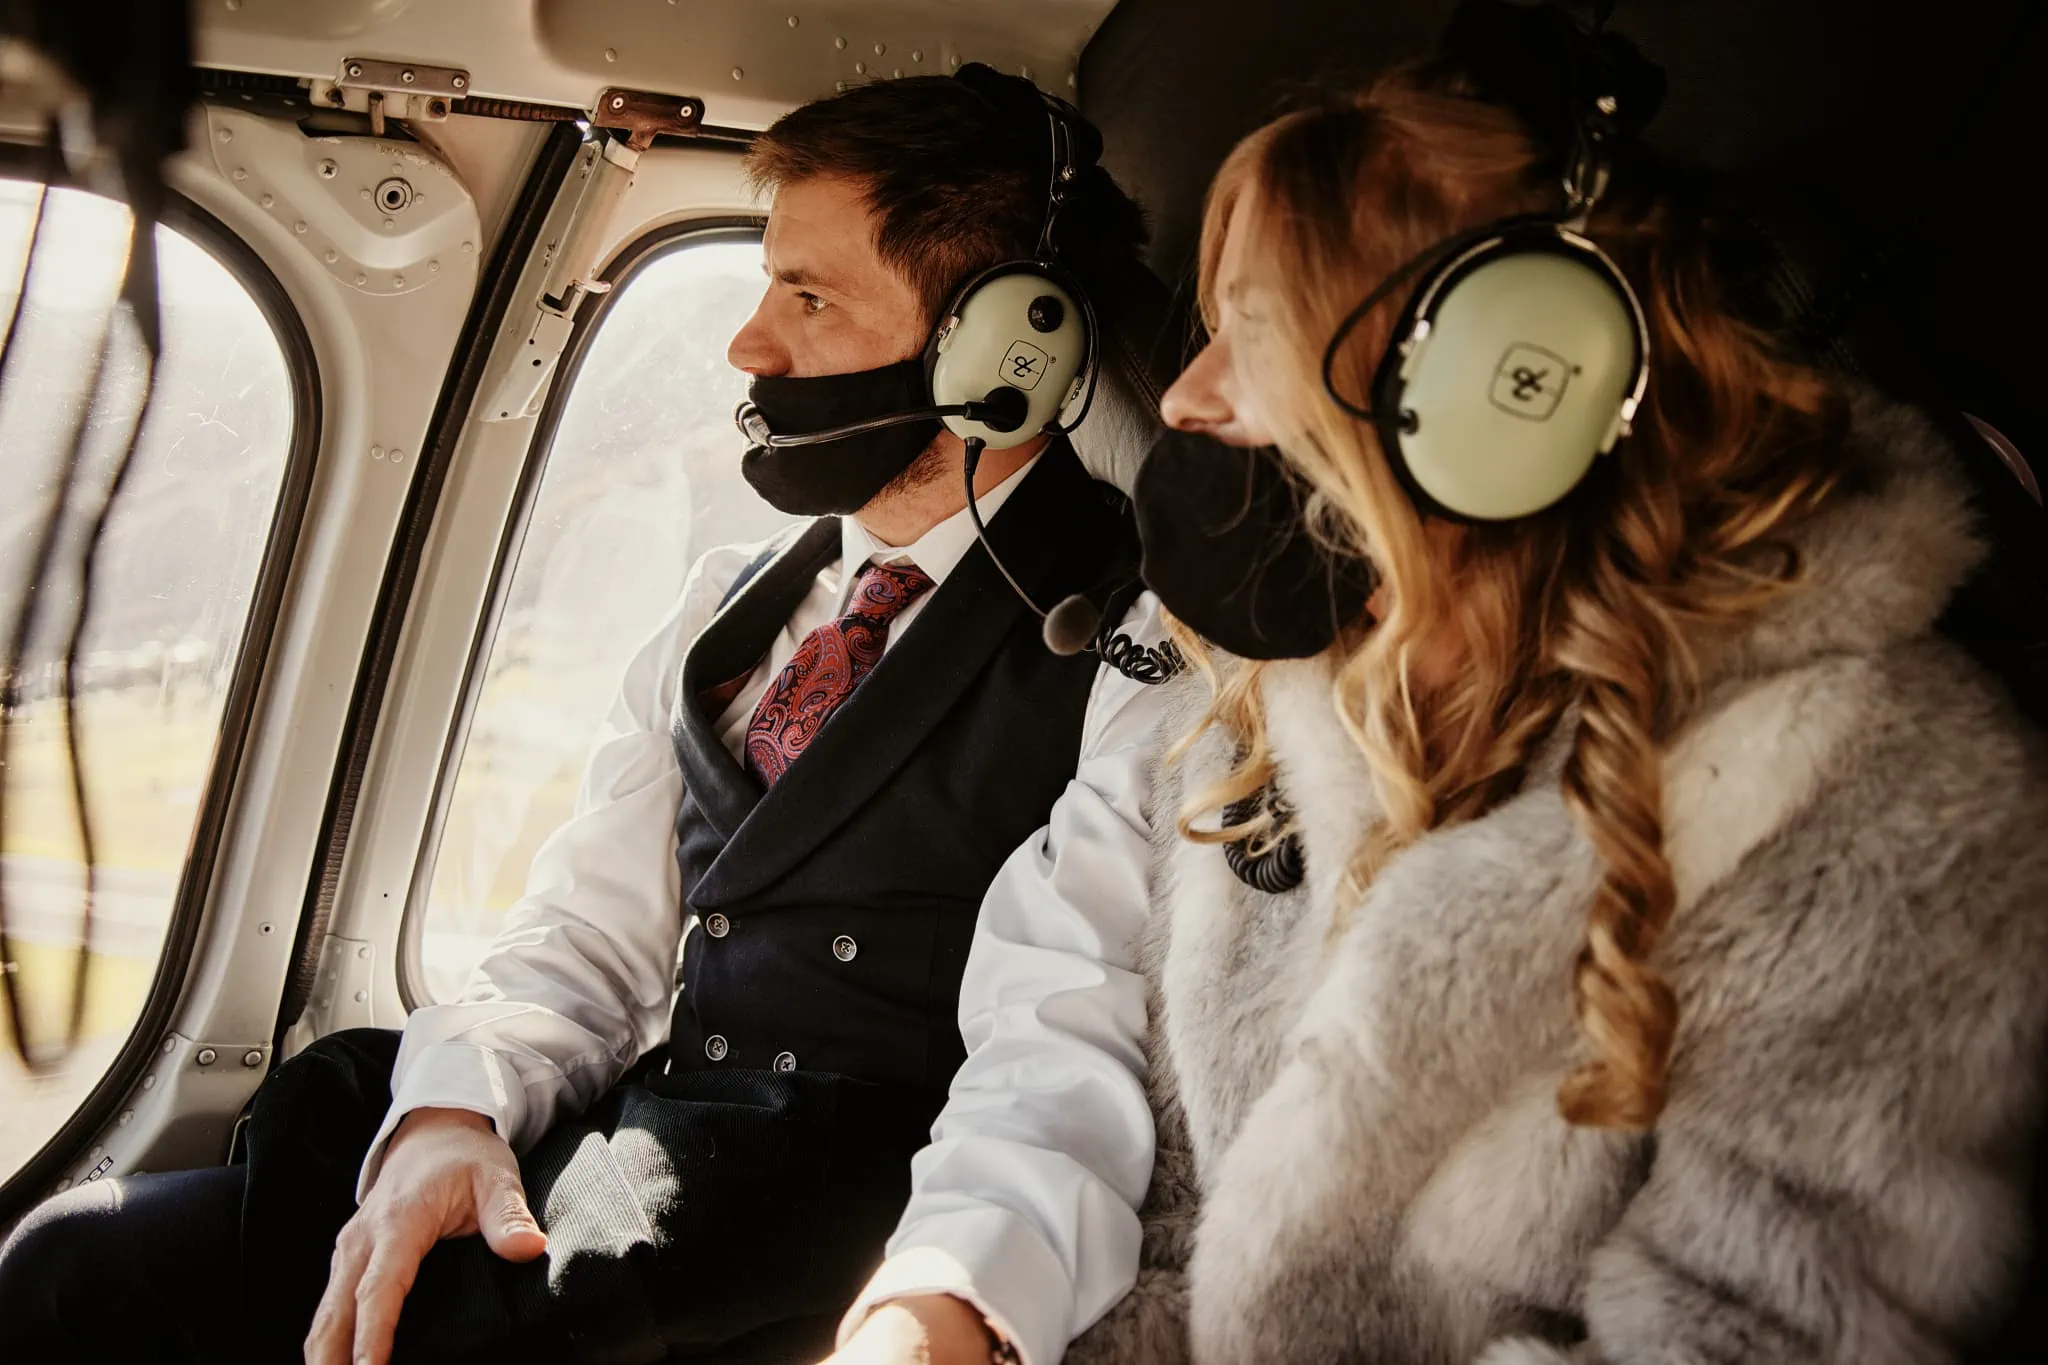 Claire and Rob exchange vows in a helicopter during their Heli Elopement Wedding at Cecil Peak, while donning face masks.